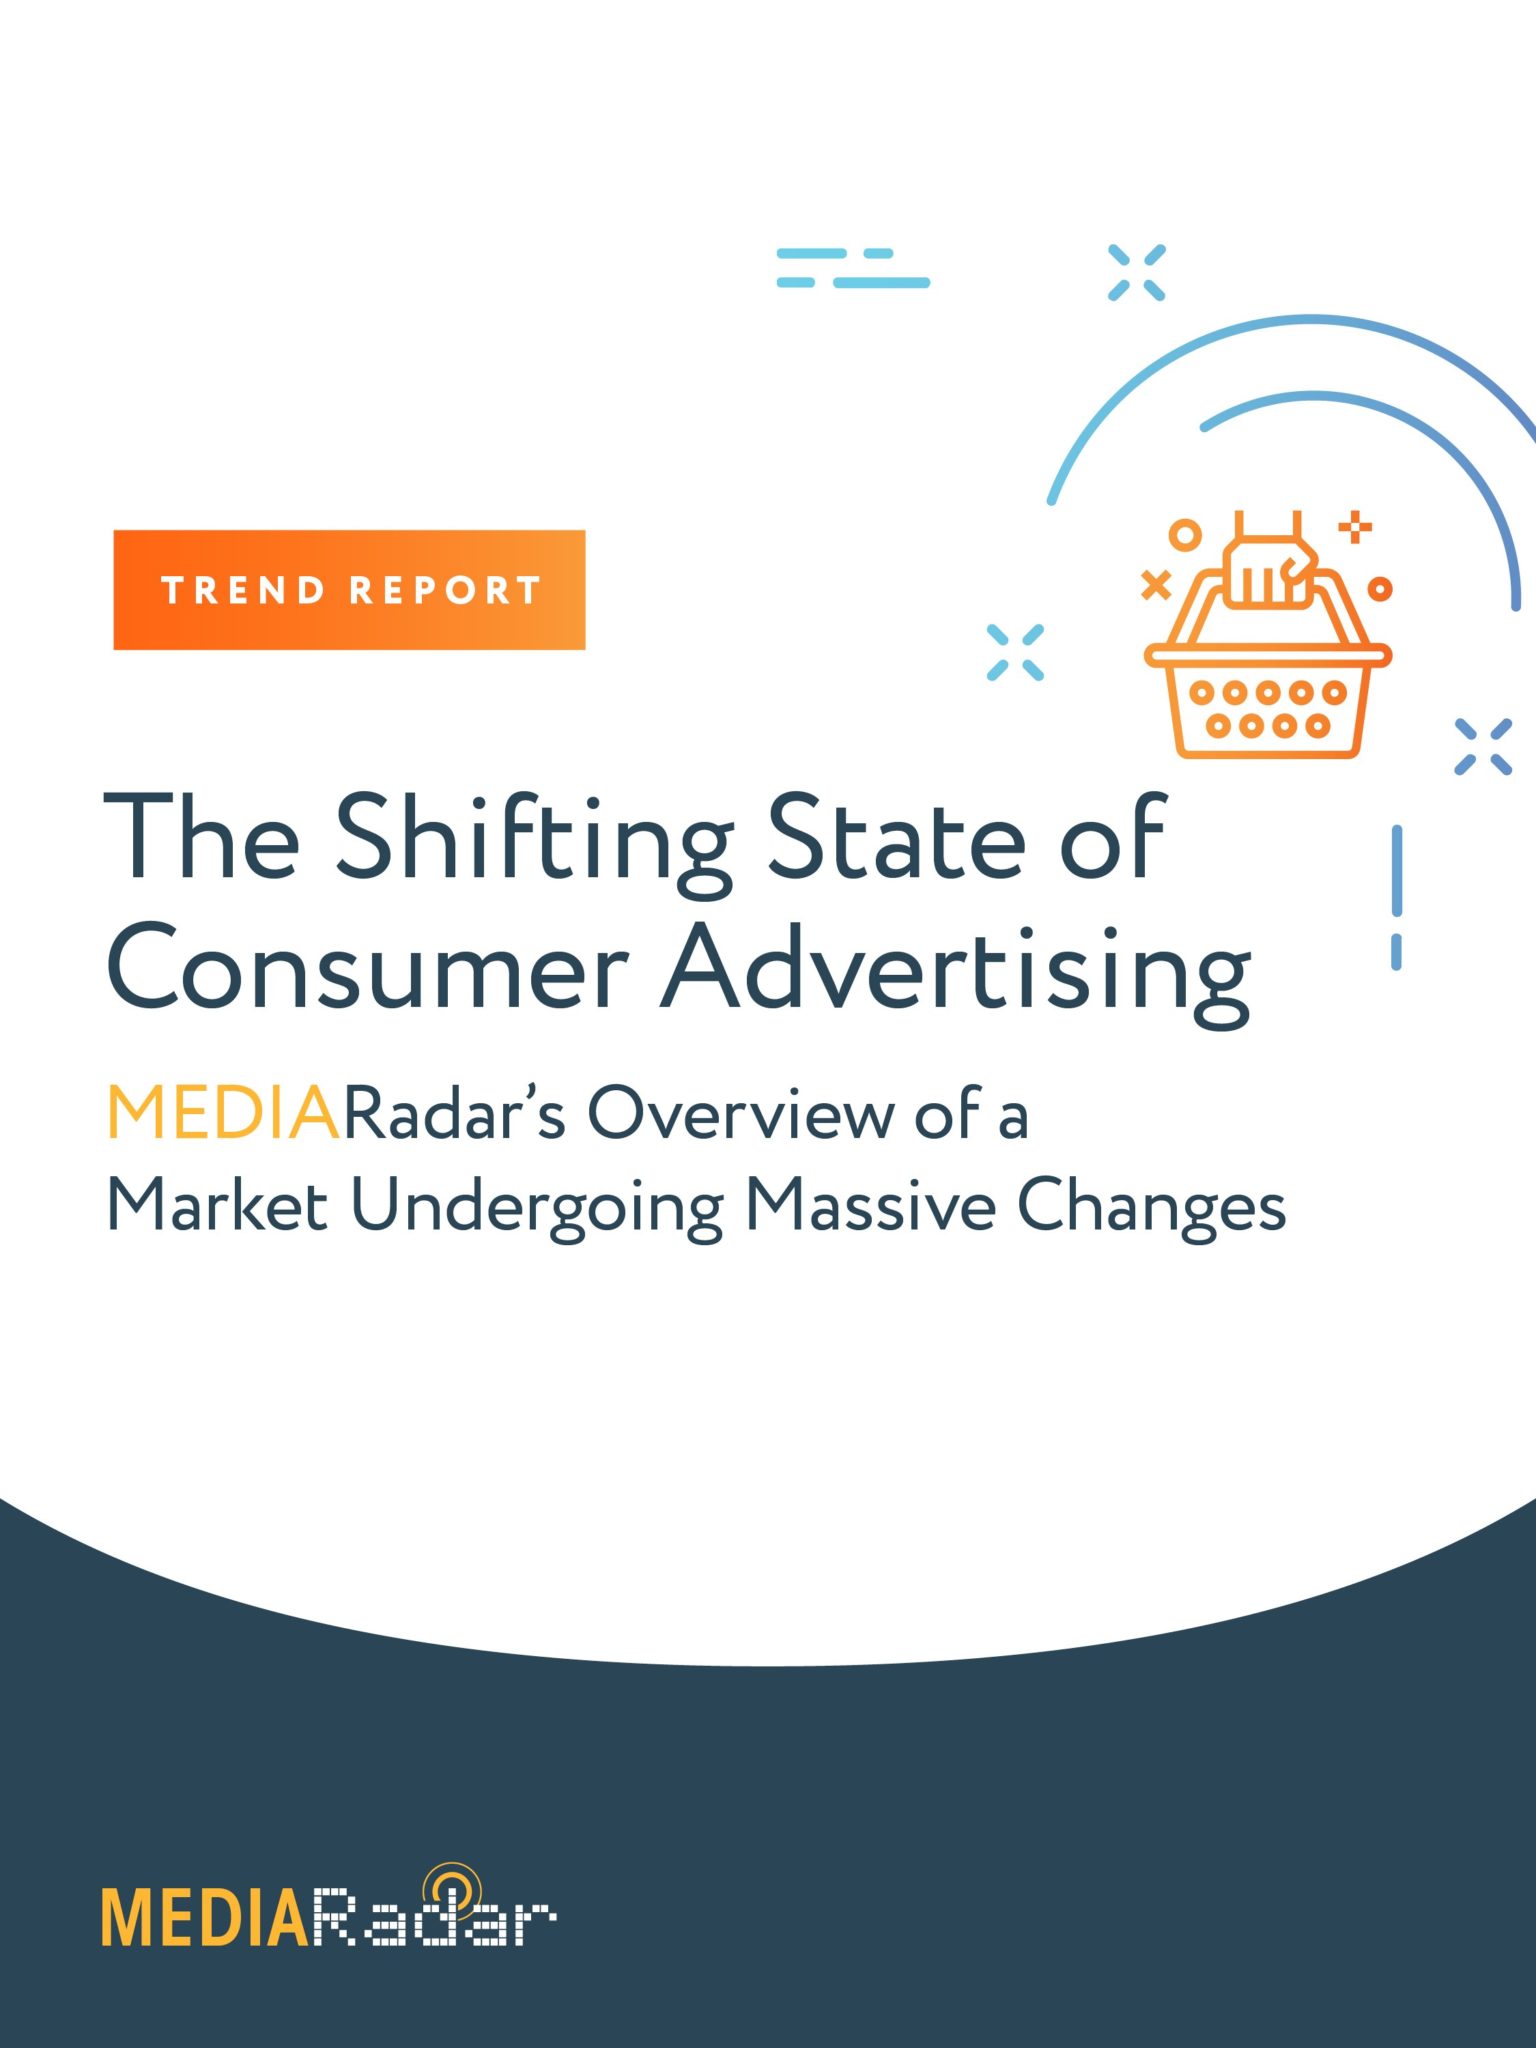 The Shifting State of Consumer Advertising